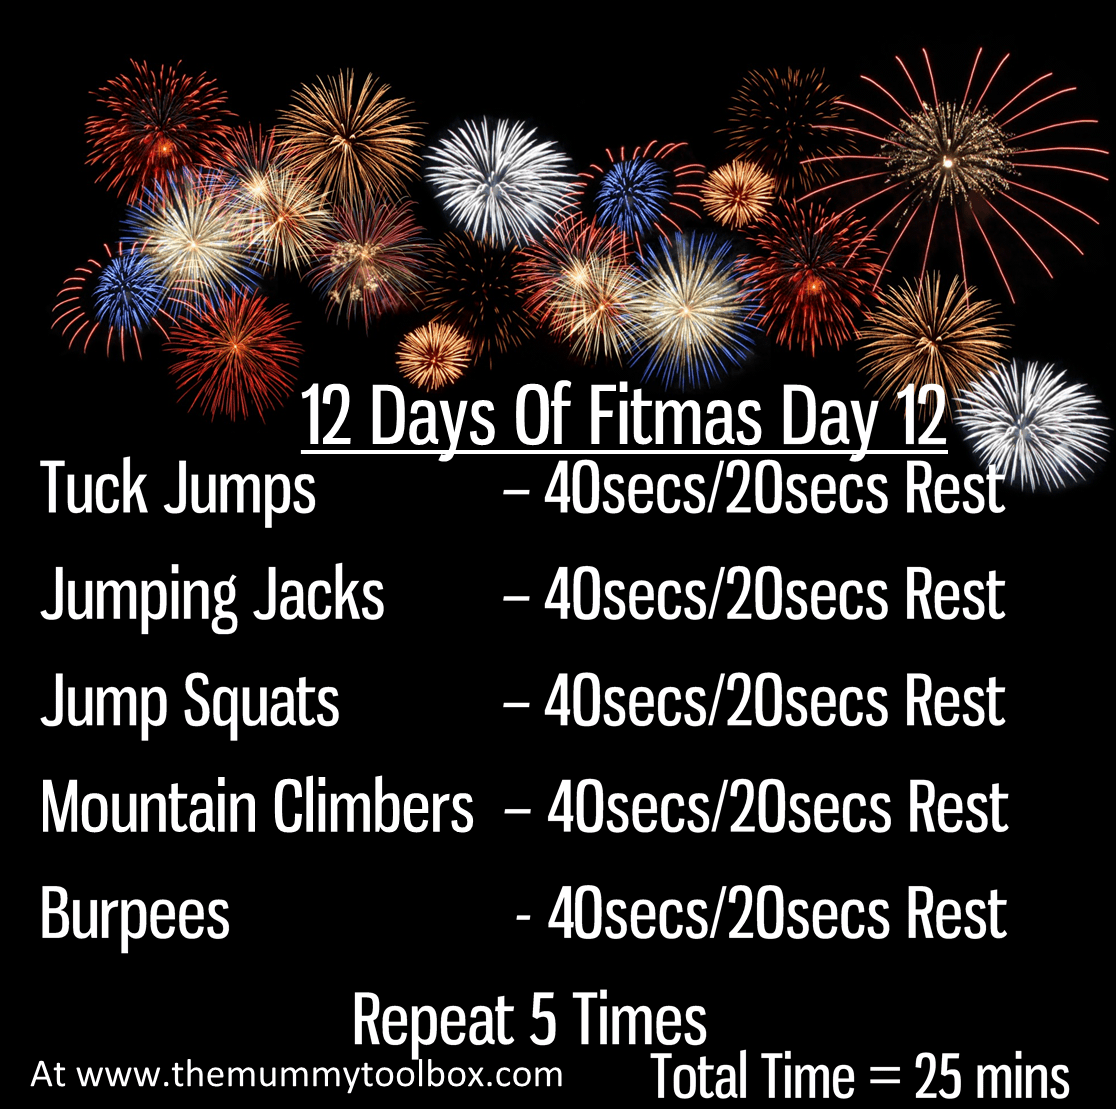 The 12 Days Of Fitmas - Day 12